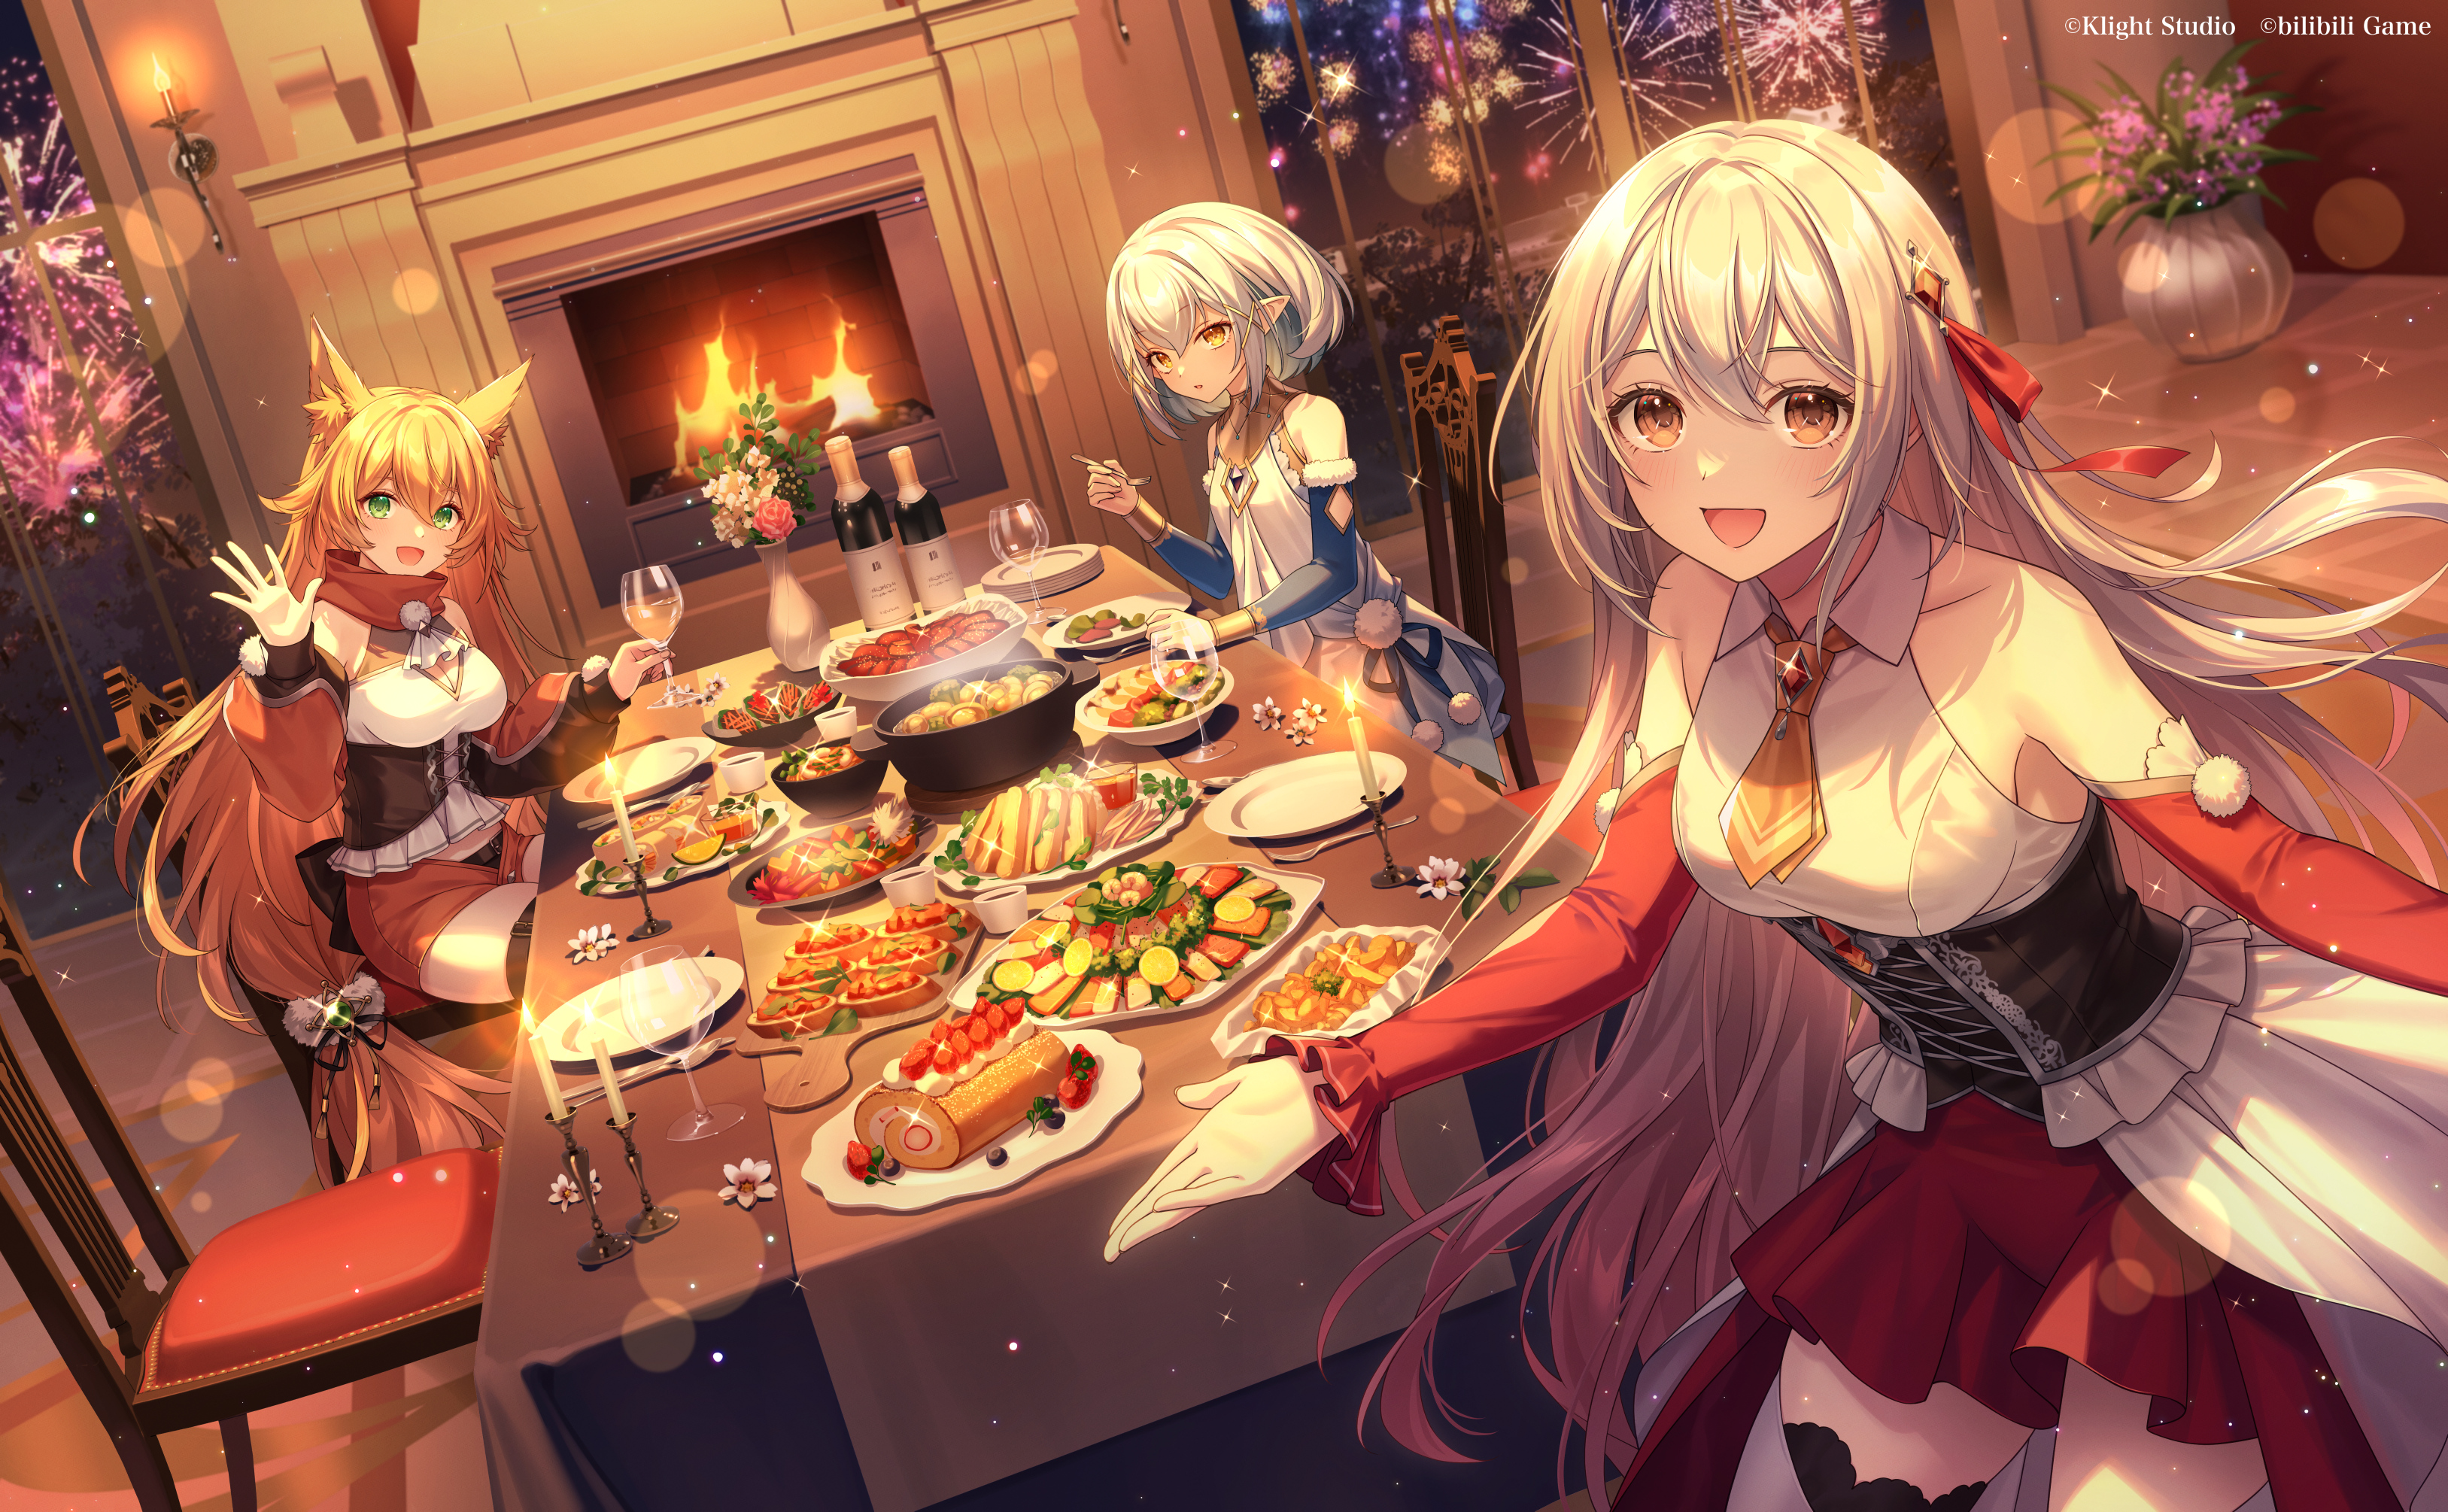 Anime Anime Girls Food Fireplace Candles Pointy Ears Animal Ears Dining Room Fireworks Plants Flower 3254x2010